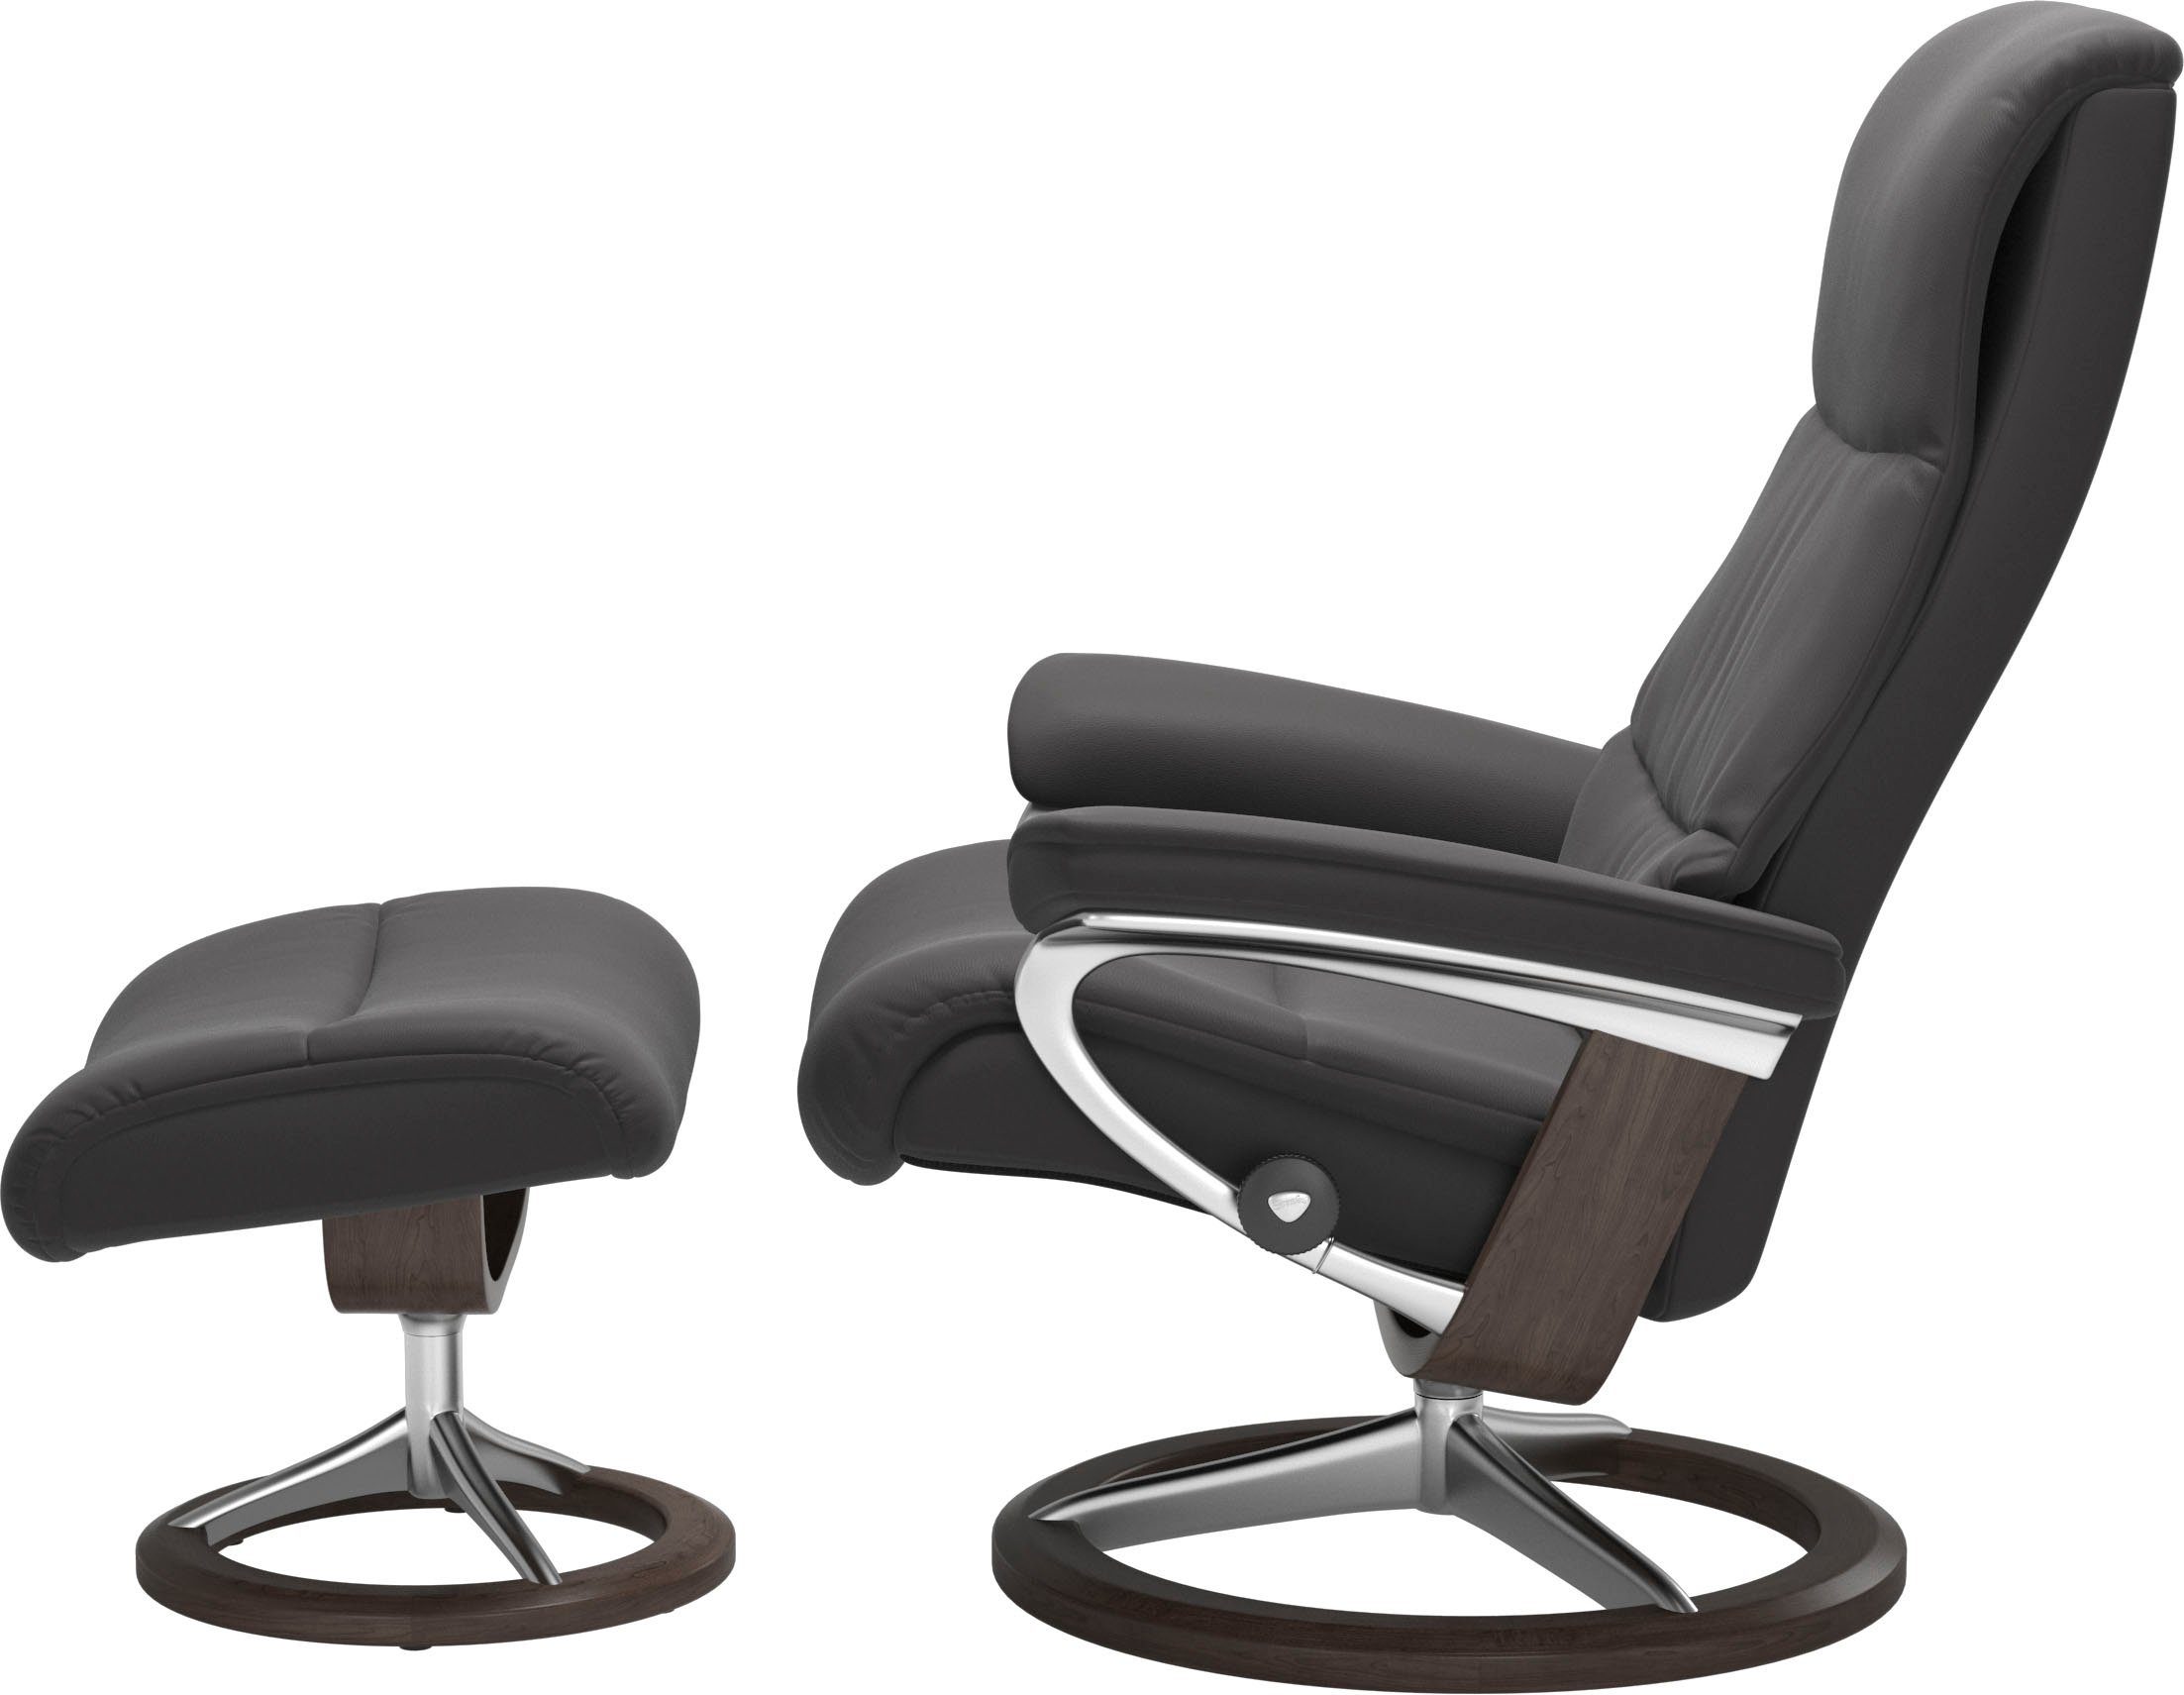 View, Base, Relaxsessel S,Gestell Stressless® Signature mit Wenge Größe